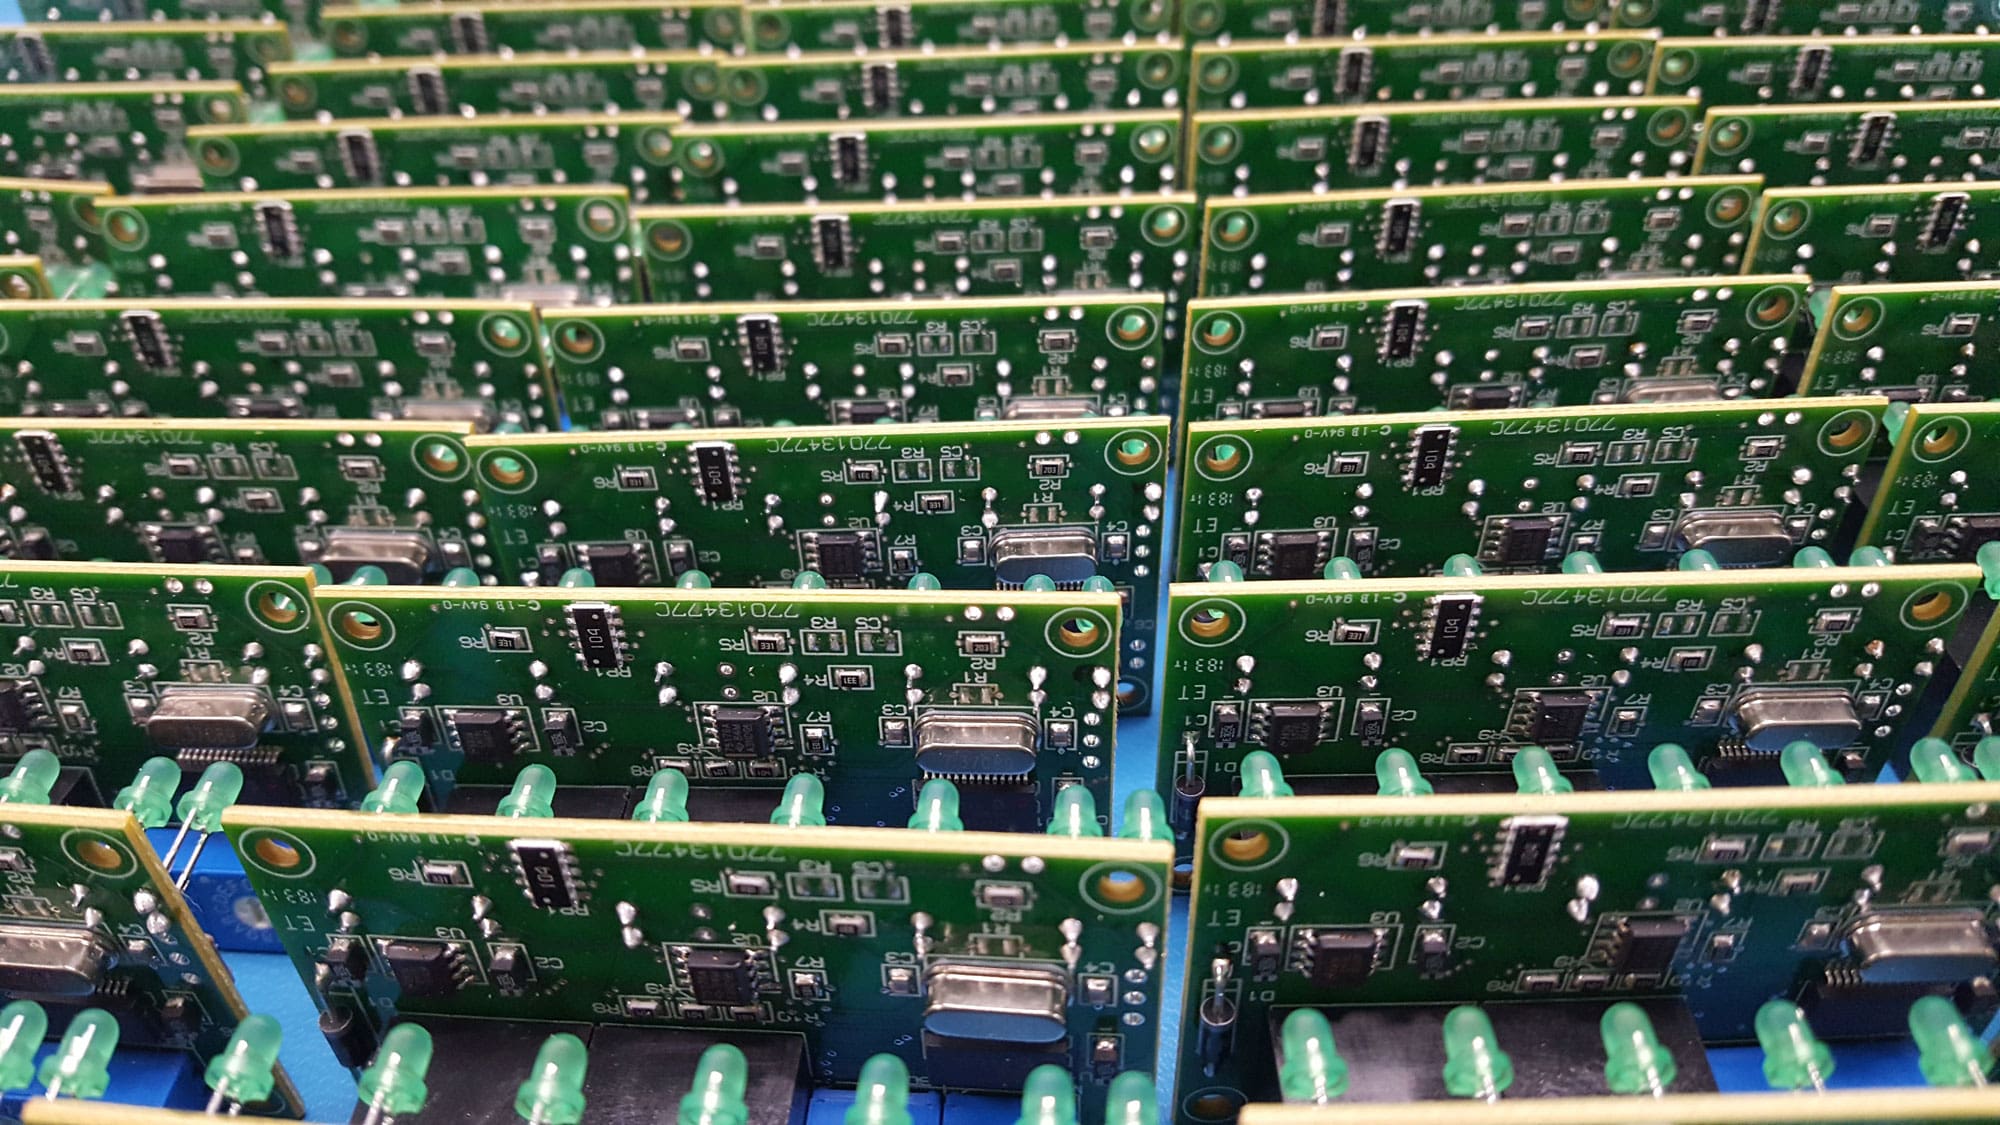 Rows of Electronic Circuit Boards